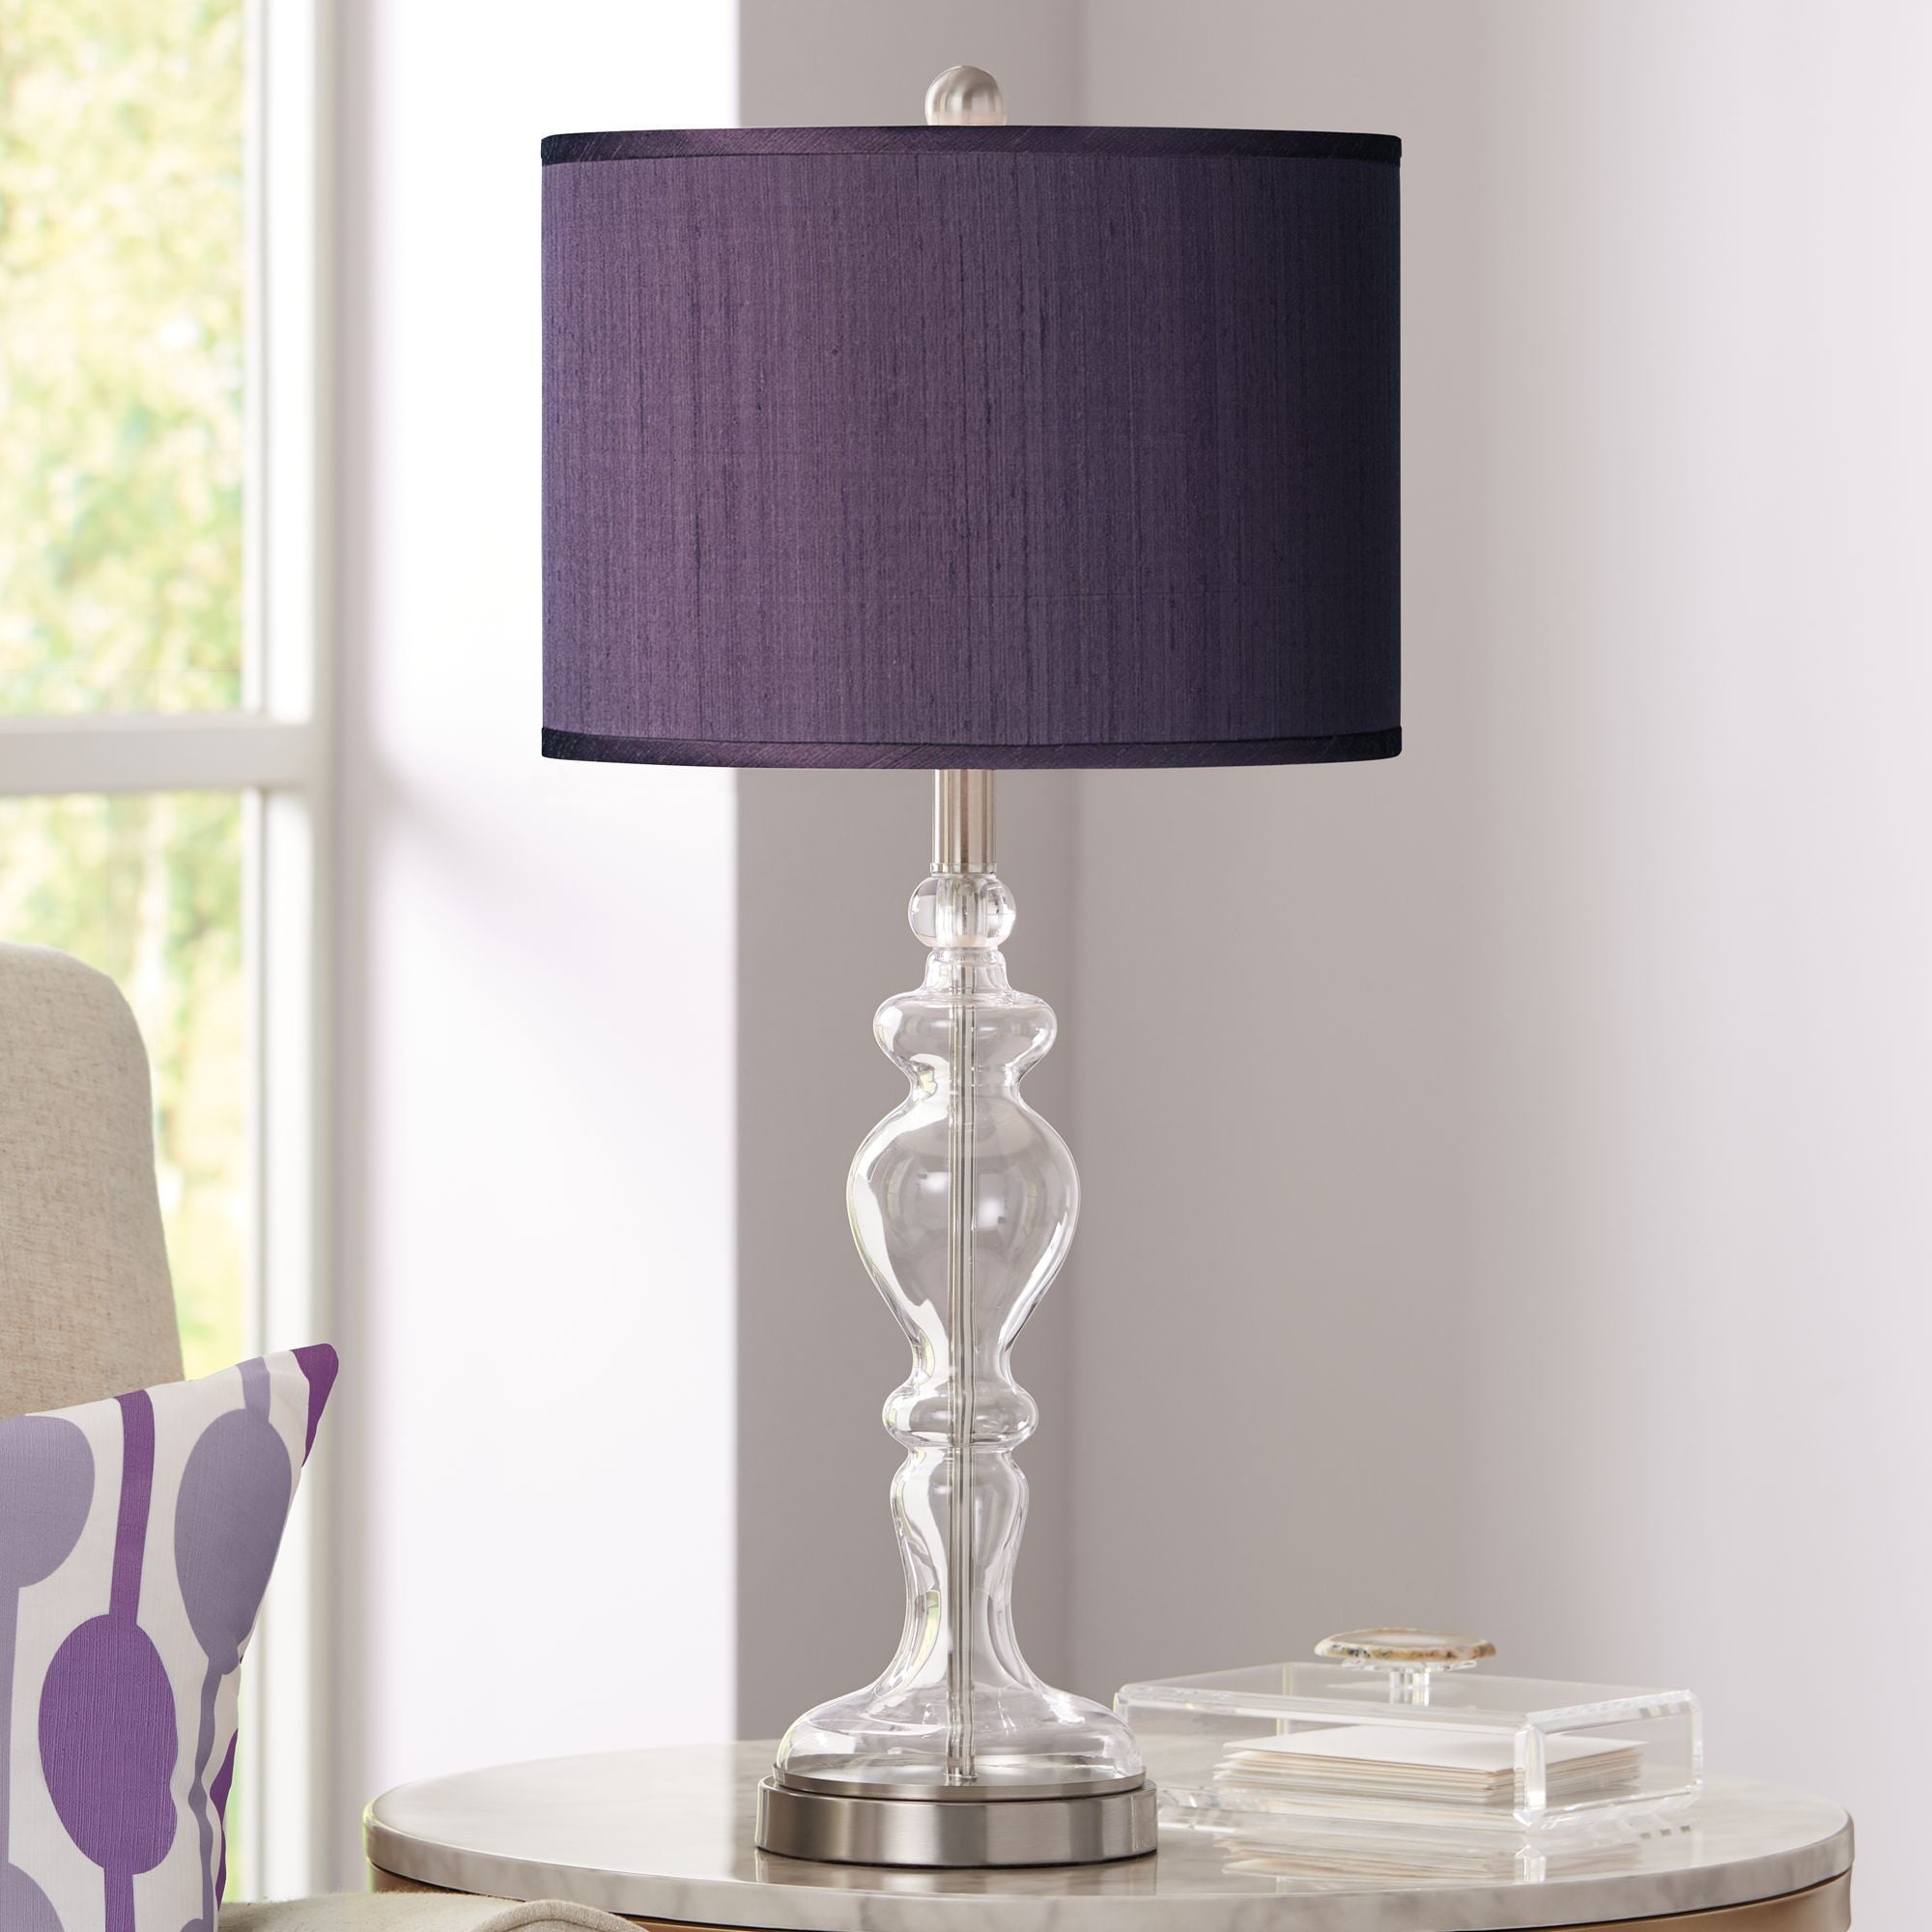 Possini Euro Design Modern Table Lamp 28" Tall Clear Glass Apothecary Eggplant Purple Faux Silk Fabric Drum Shade for Bedroom Living Room House Office